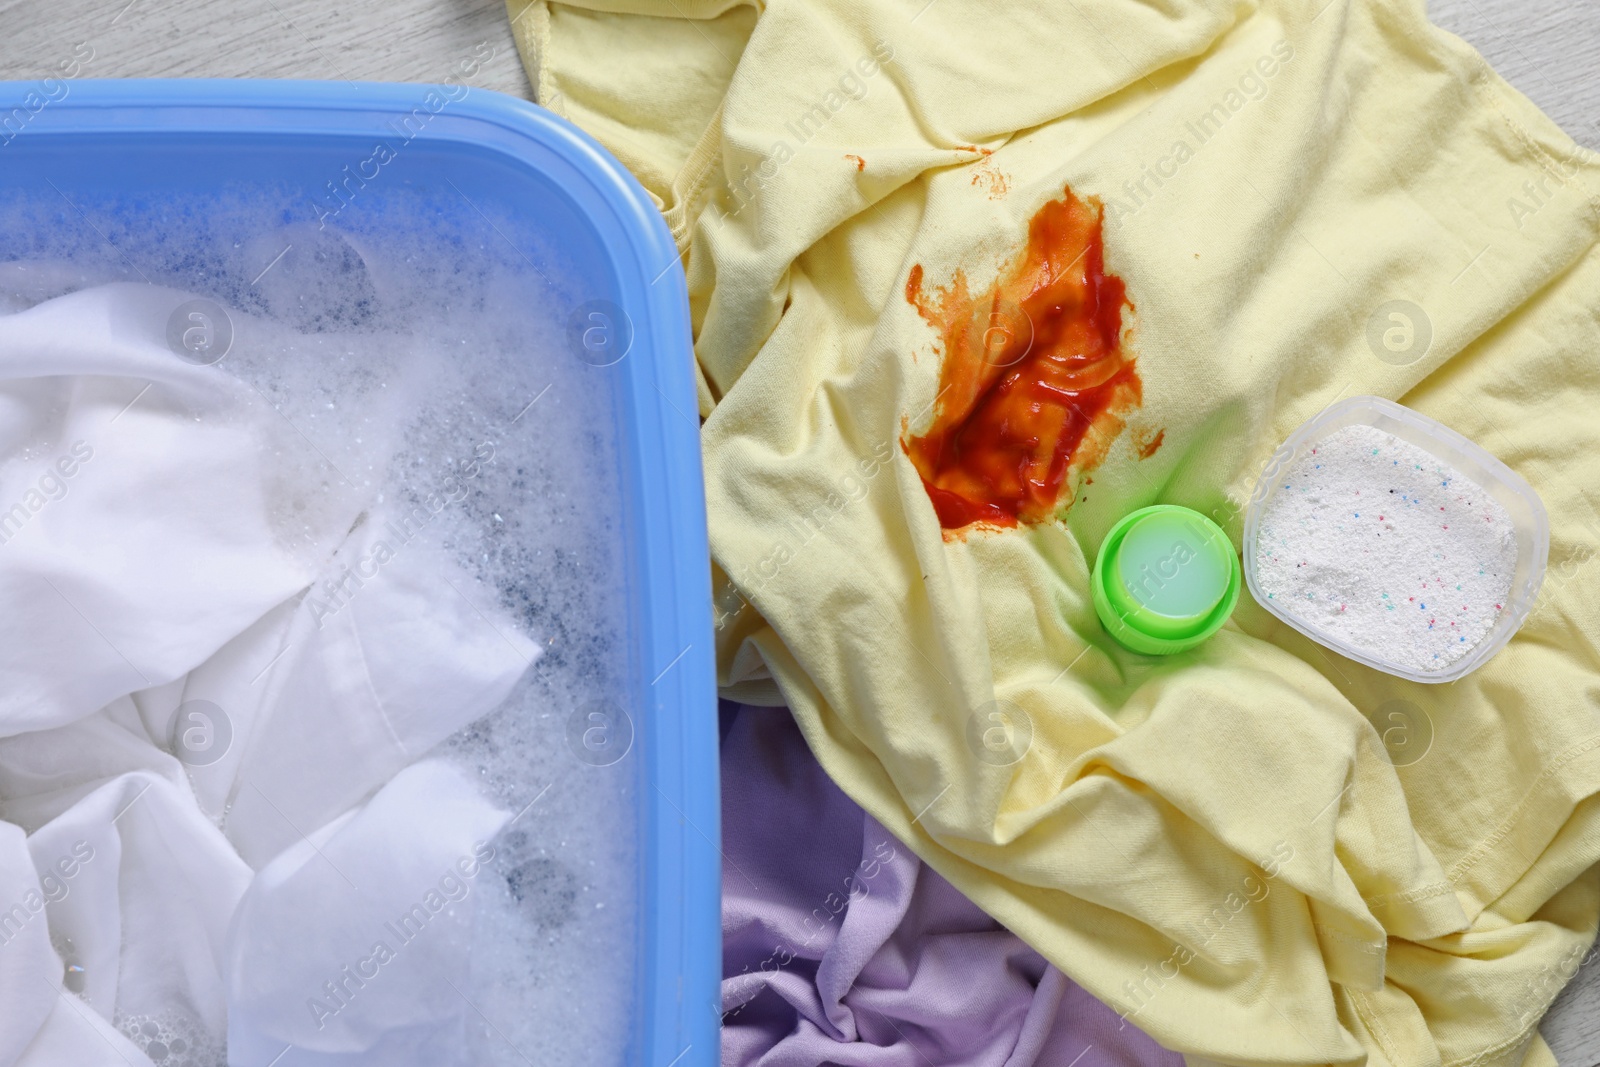 Photo of Dirty garment and detergent near basin with white shirt, top view. Hand washing laundry